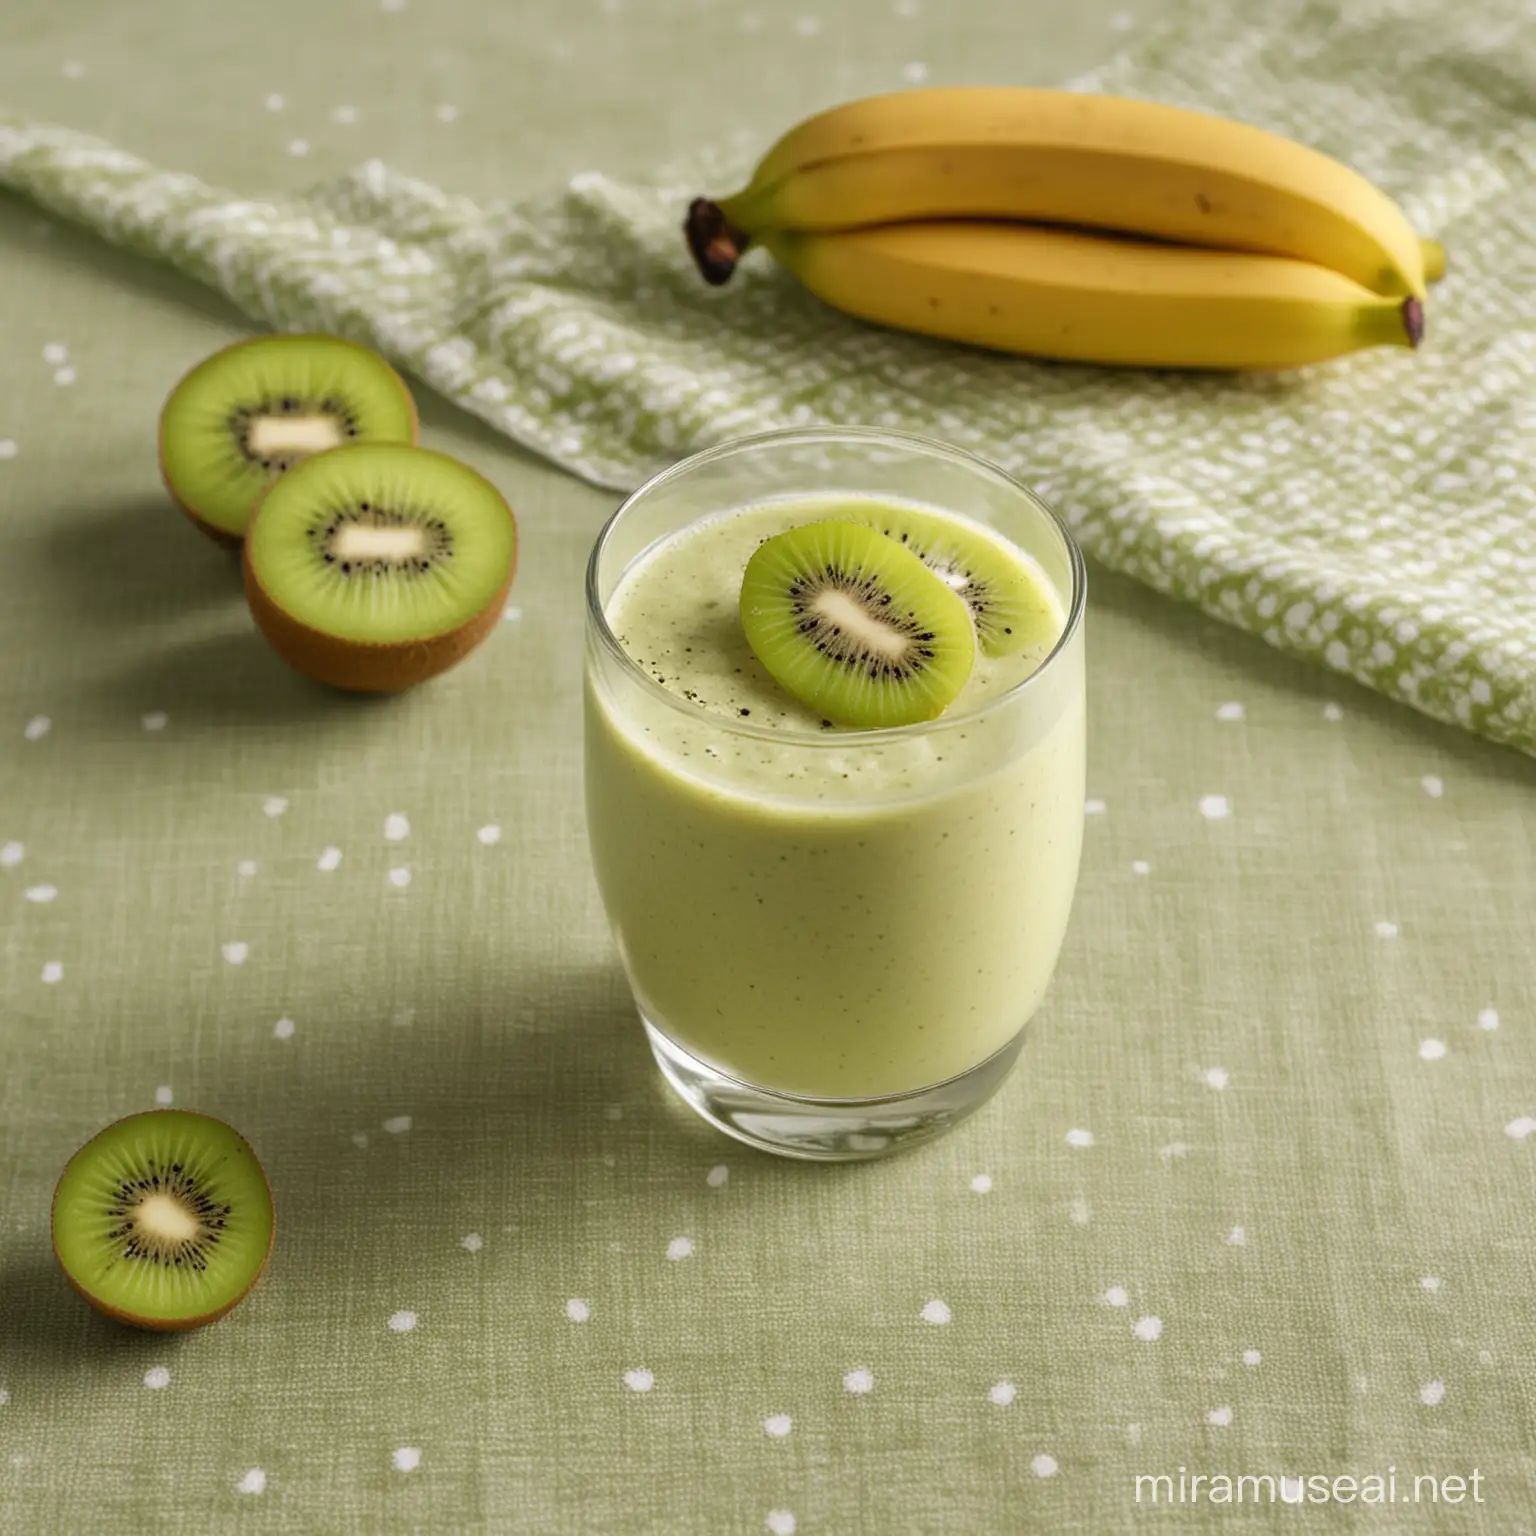 Banana and Kiwi Smoothie in a glass on a table with a nice tablecloth